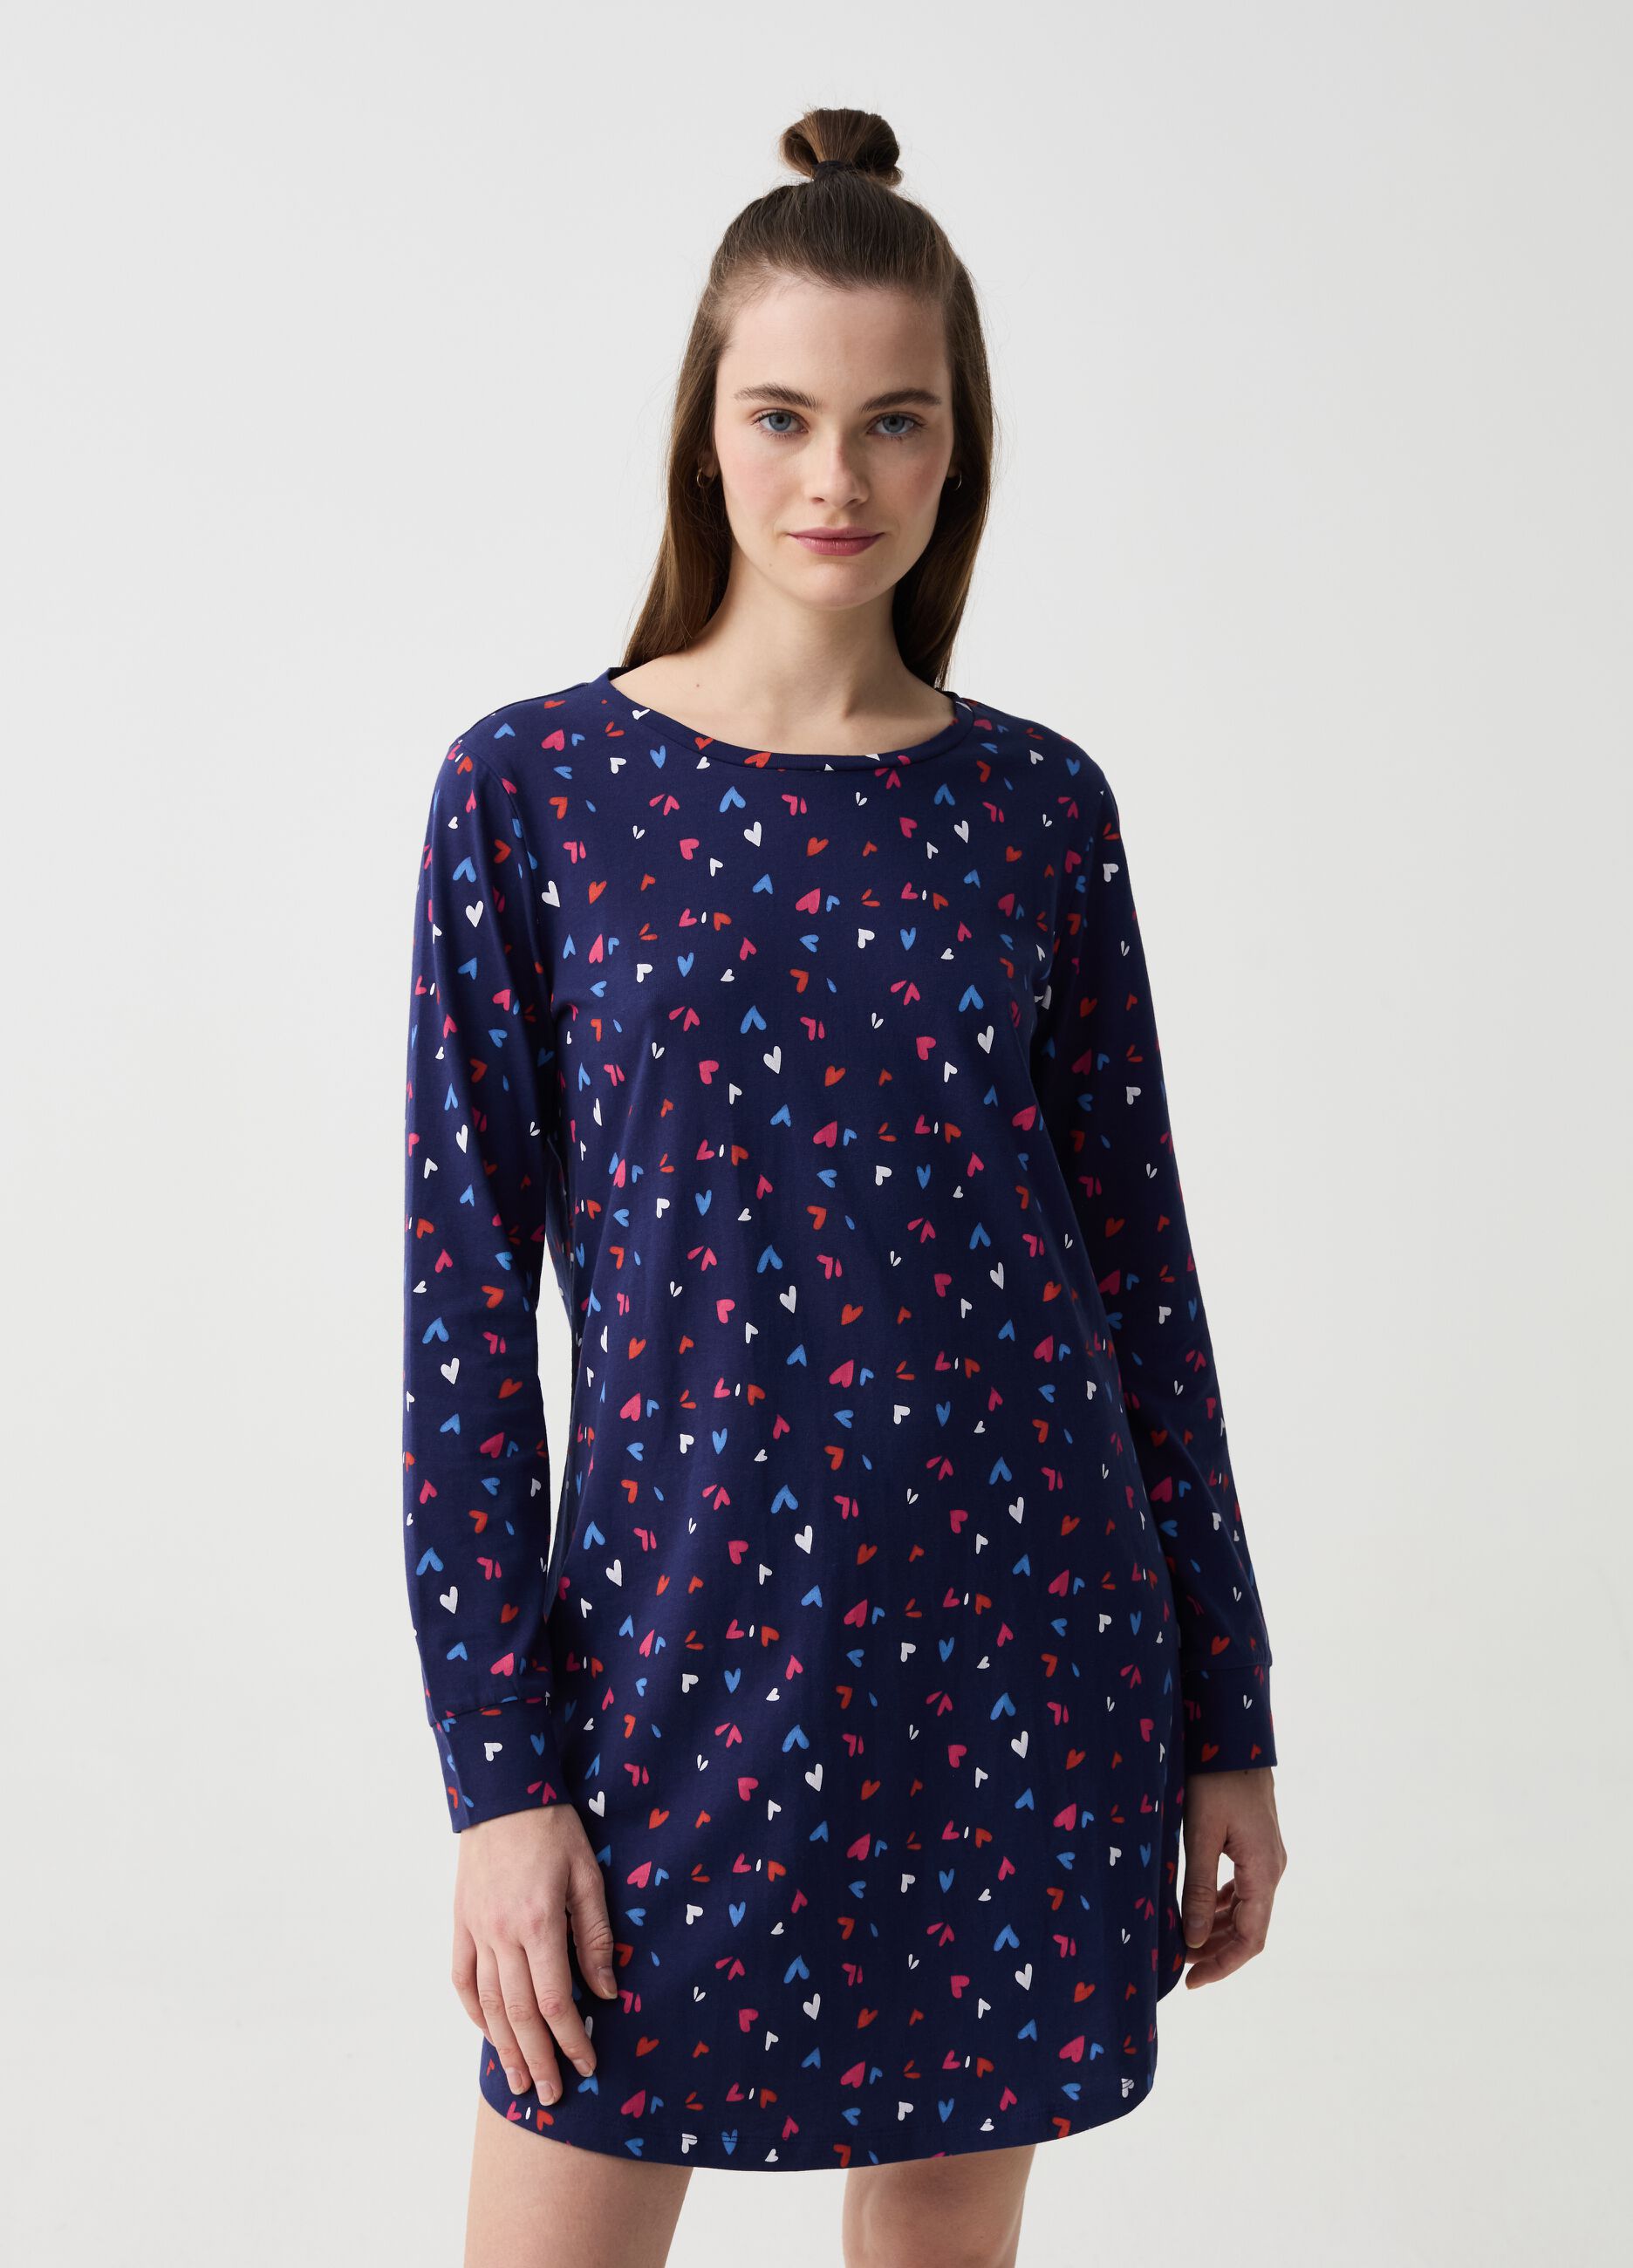 Nightdress with hearts print